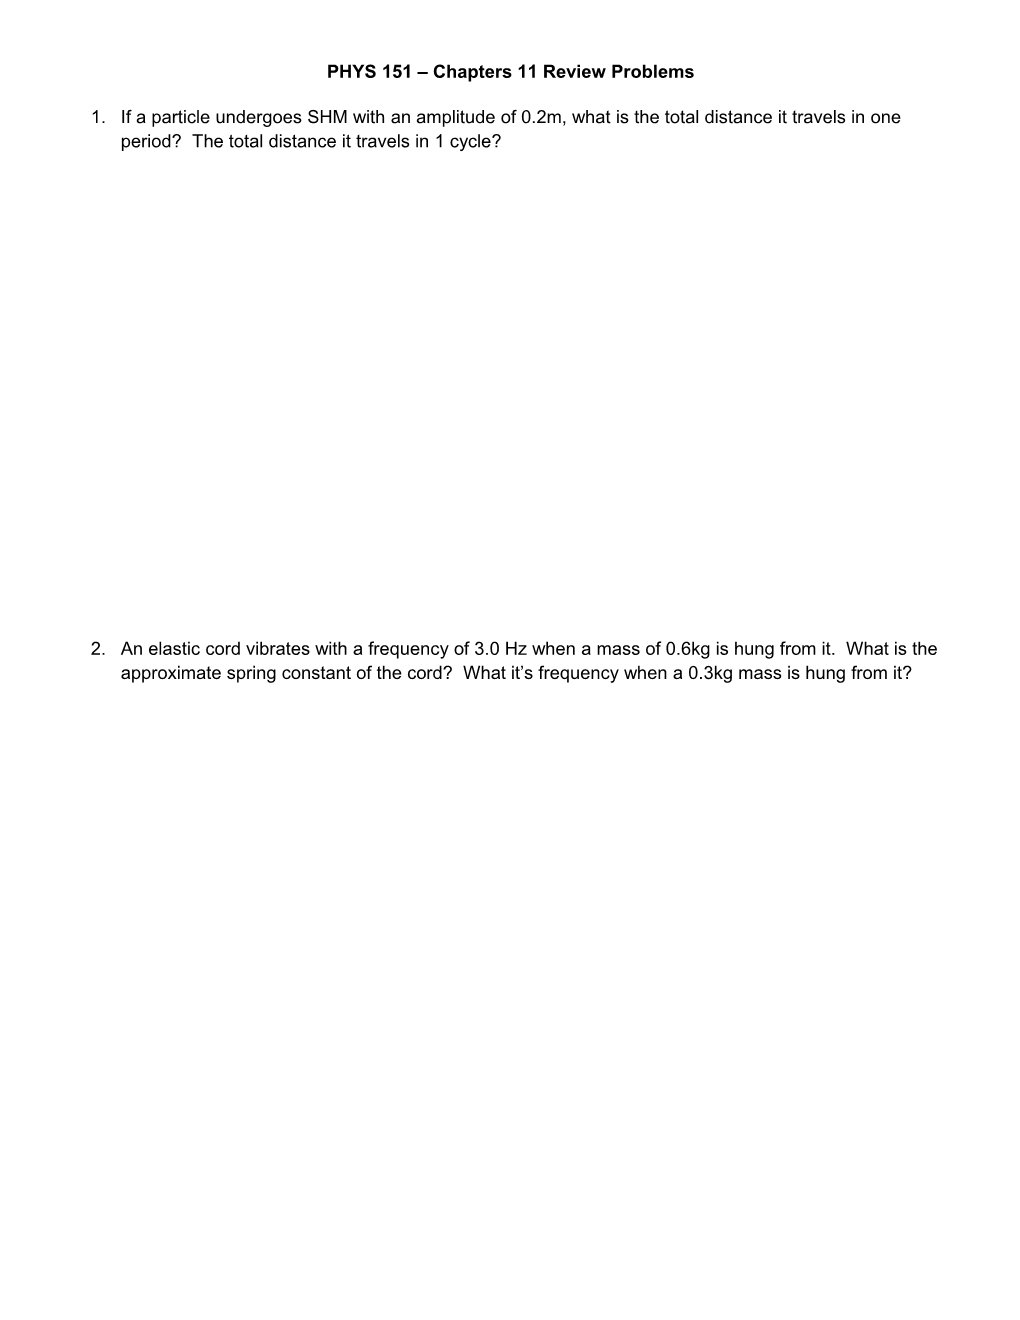 PHYS 151 Chapters 11 Review Problems